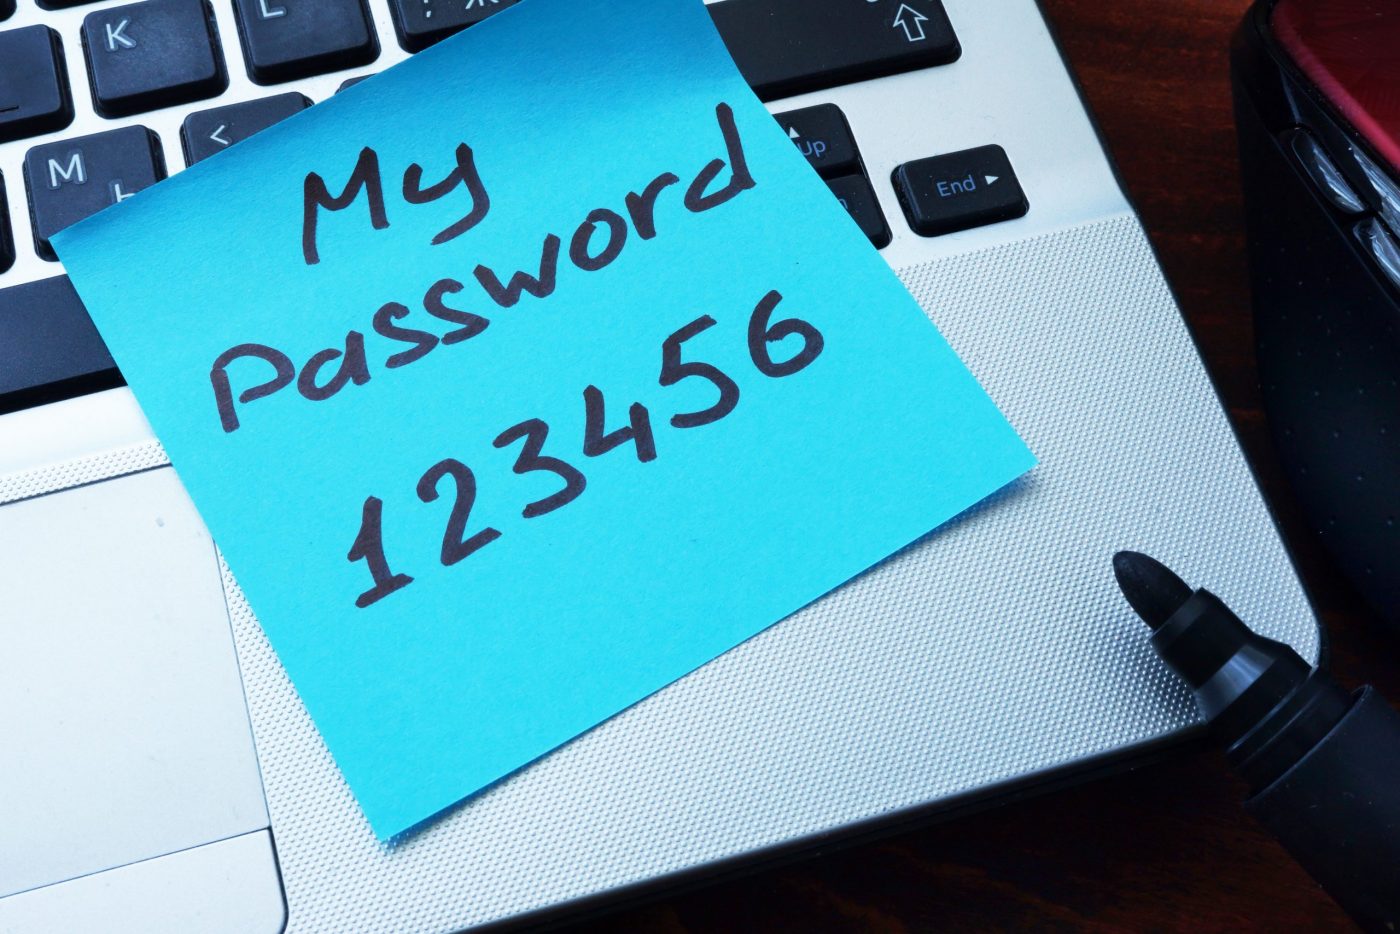 Cyber Security, Passwords, and How to Keep Your Finances Safe